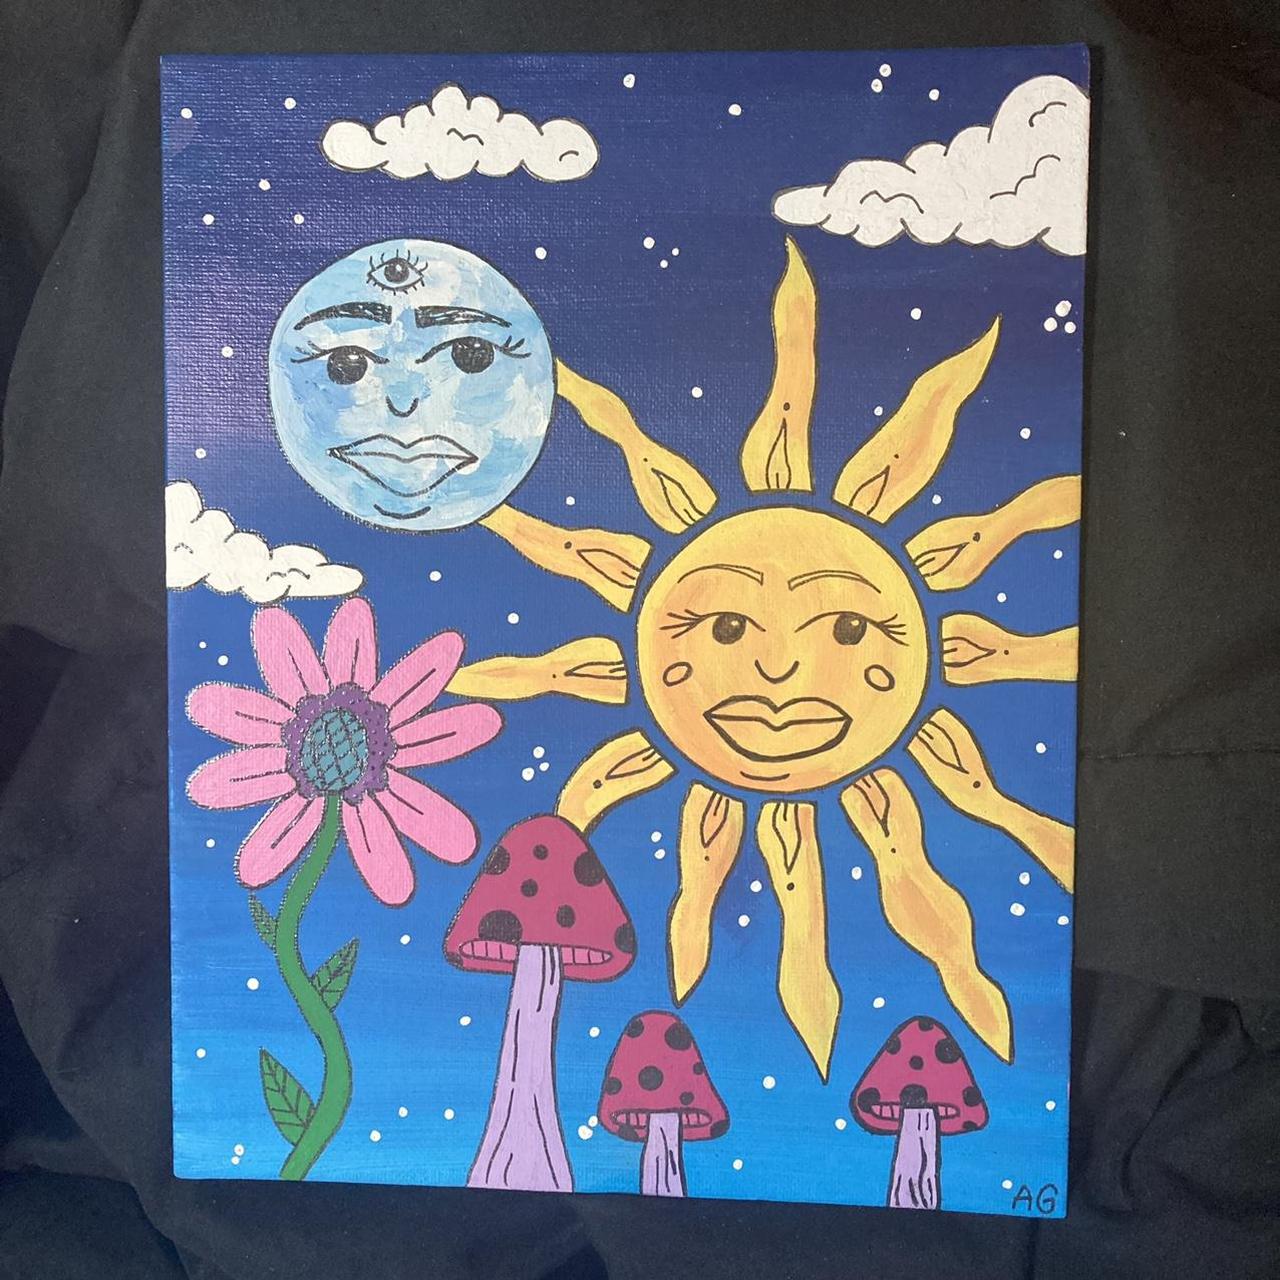 acrylic painting on an 8x10 canvas board of the sun behind gray clouds